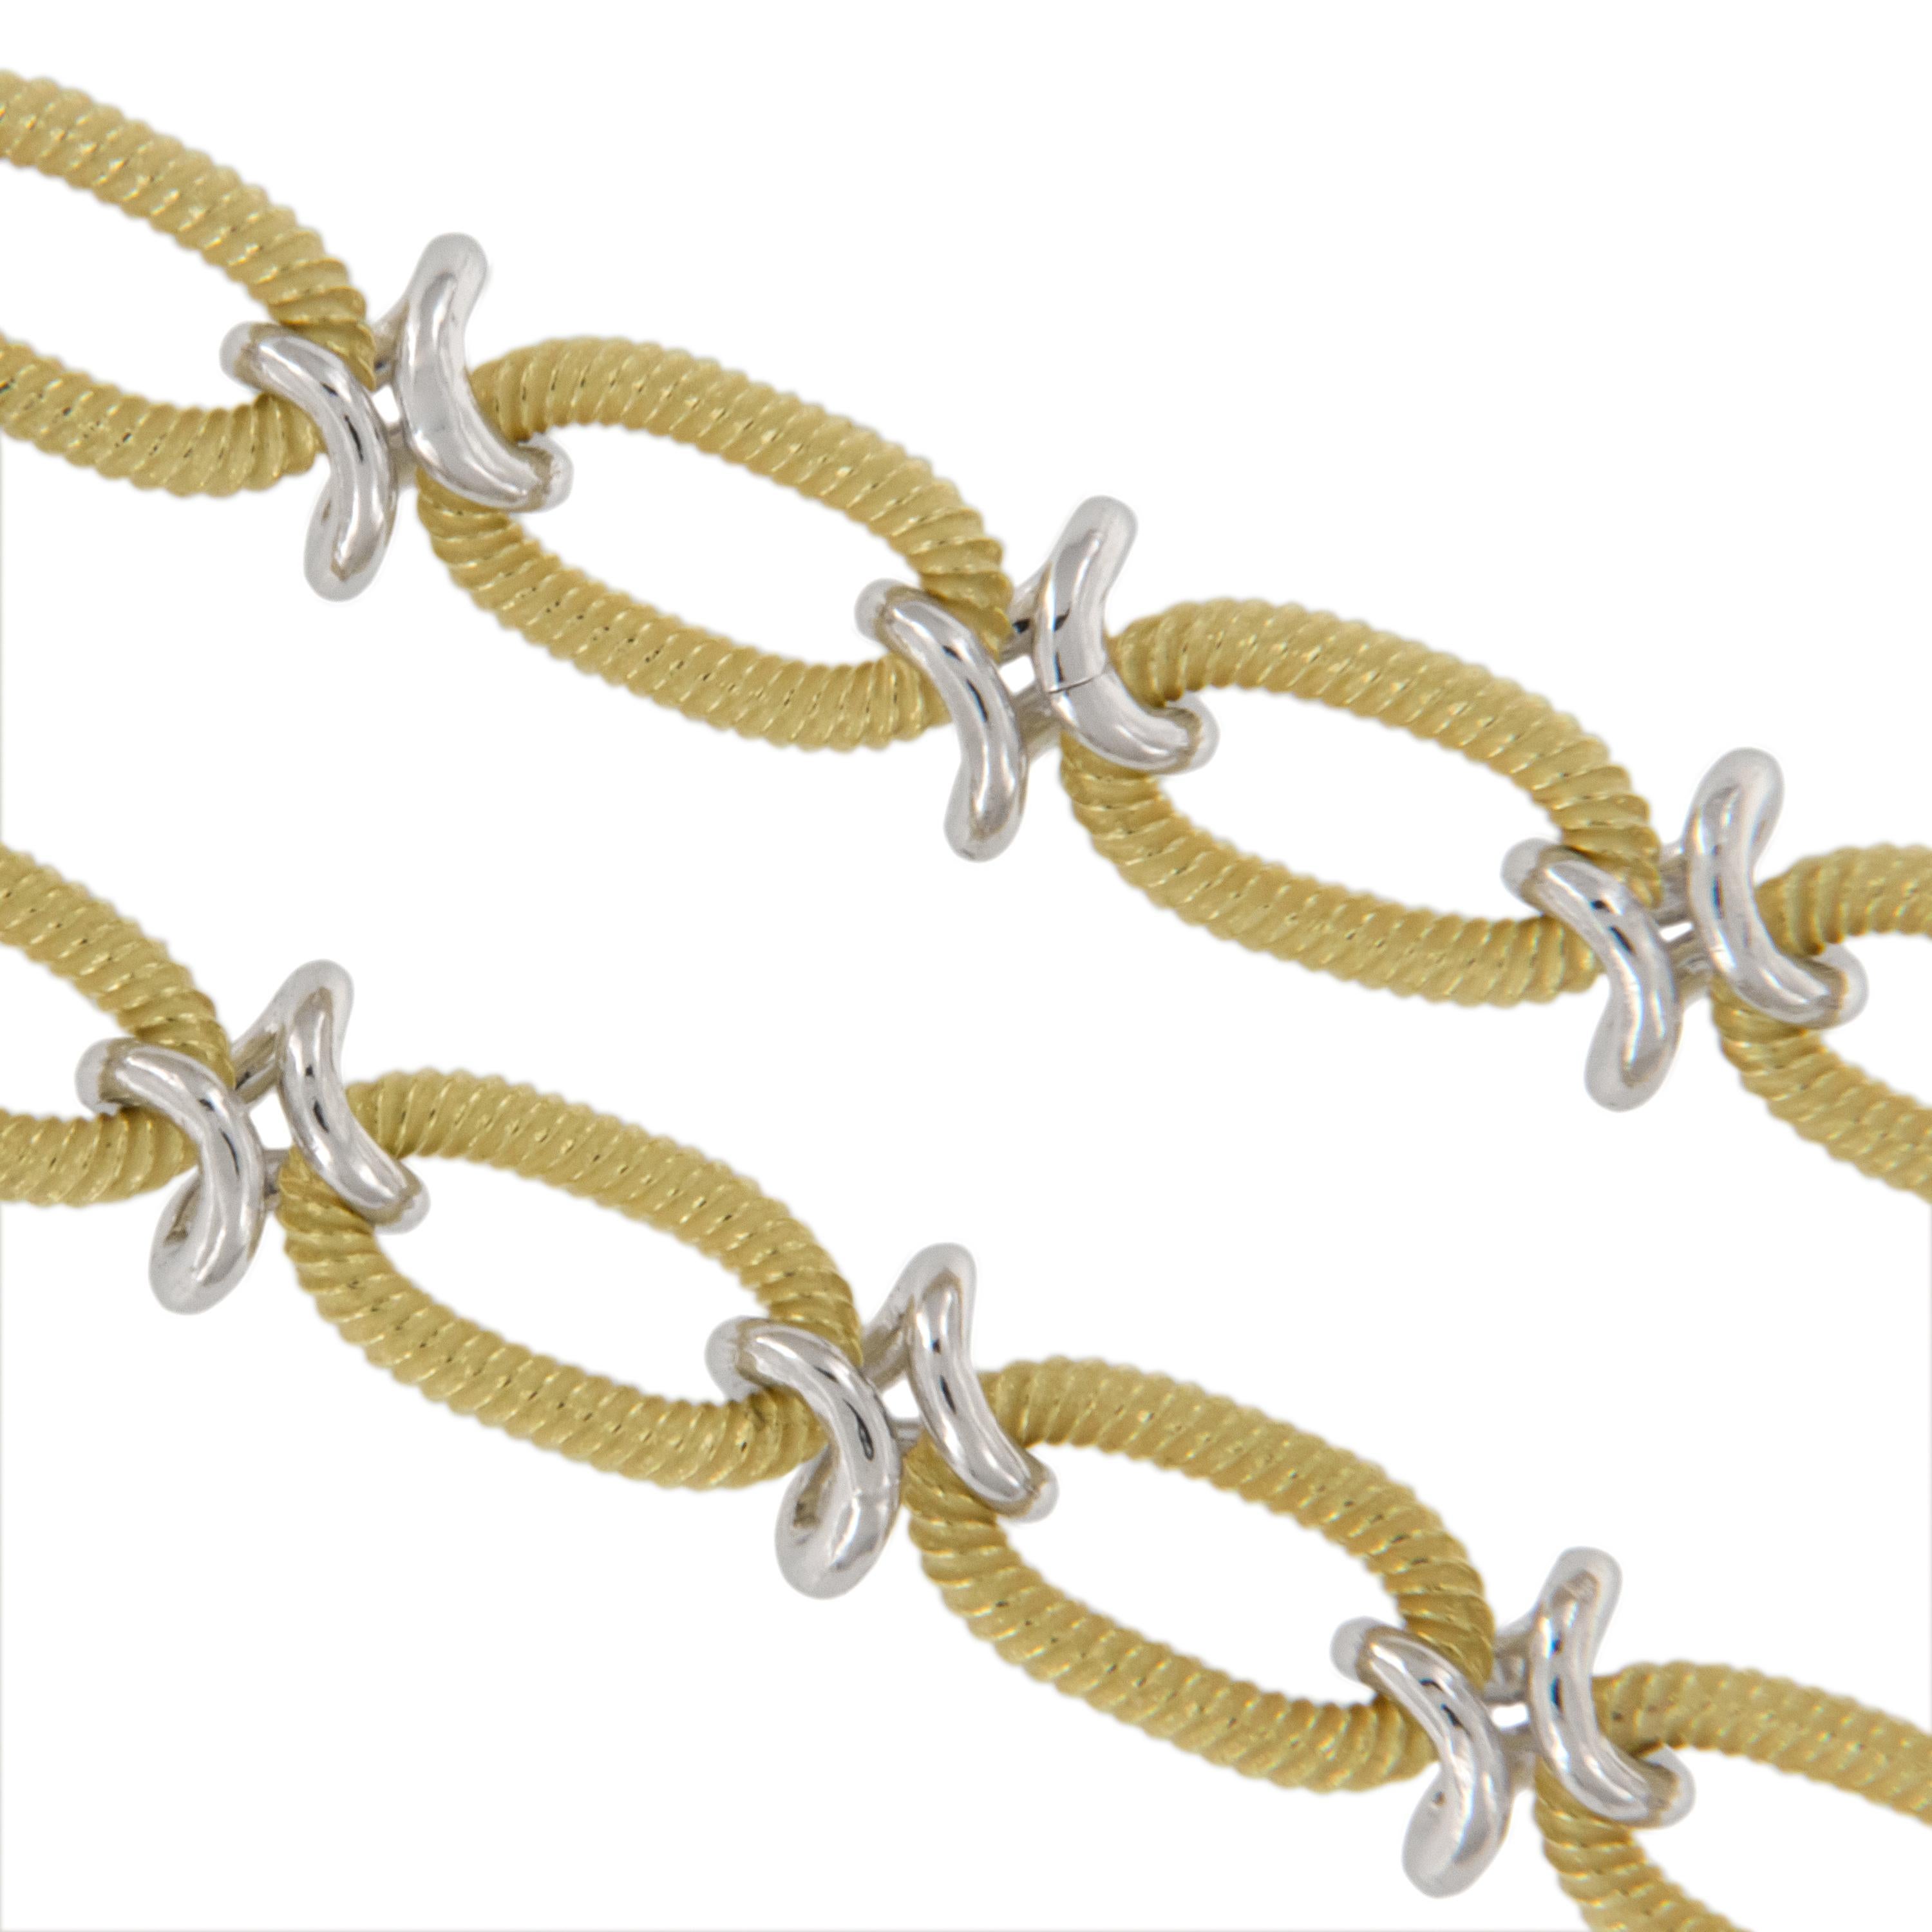 Well known for their fine craftsmanship, the Italians hand make the loveliest chains and this one is no exception! Fine 18 karat yellow textured oval links intermingle with bright polished white gold infinity connector links for an 18